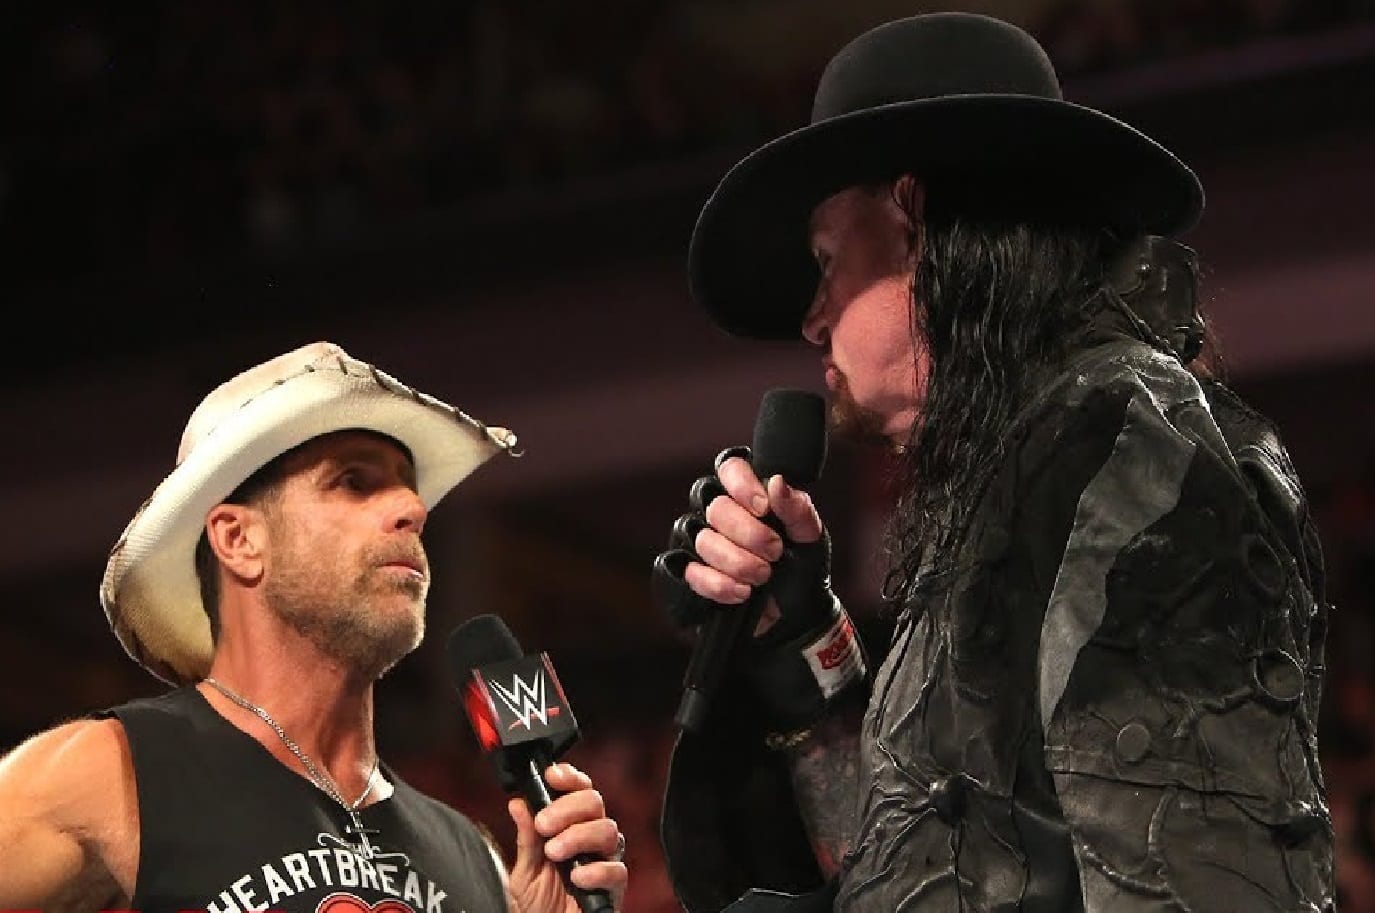 Shawn Michaels vs The Undertaker Seems To Be WWE’s Direction